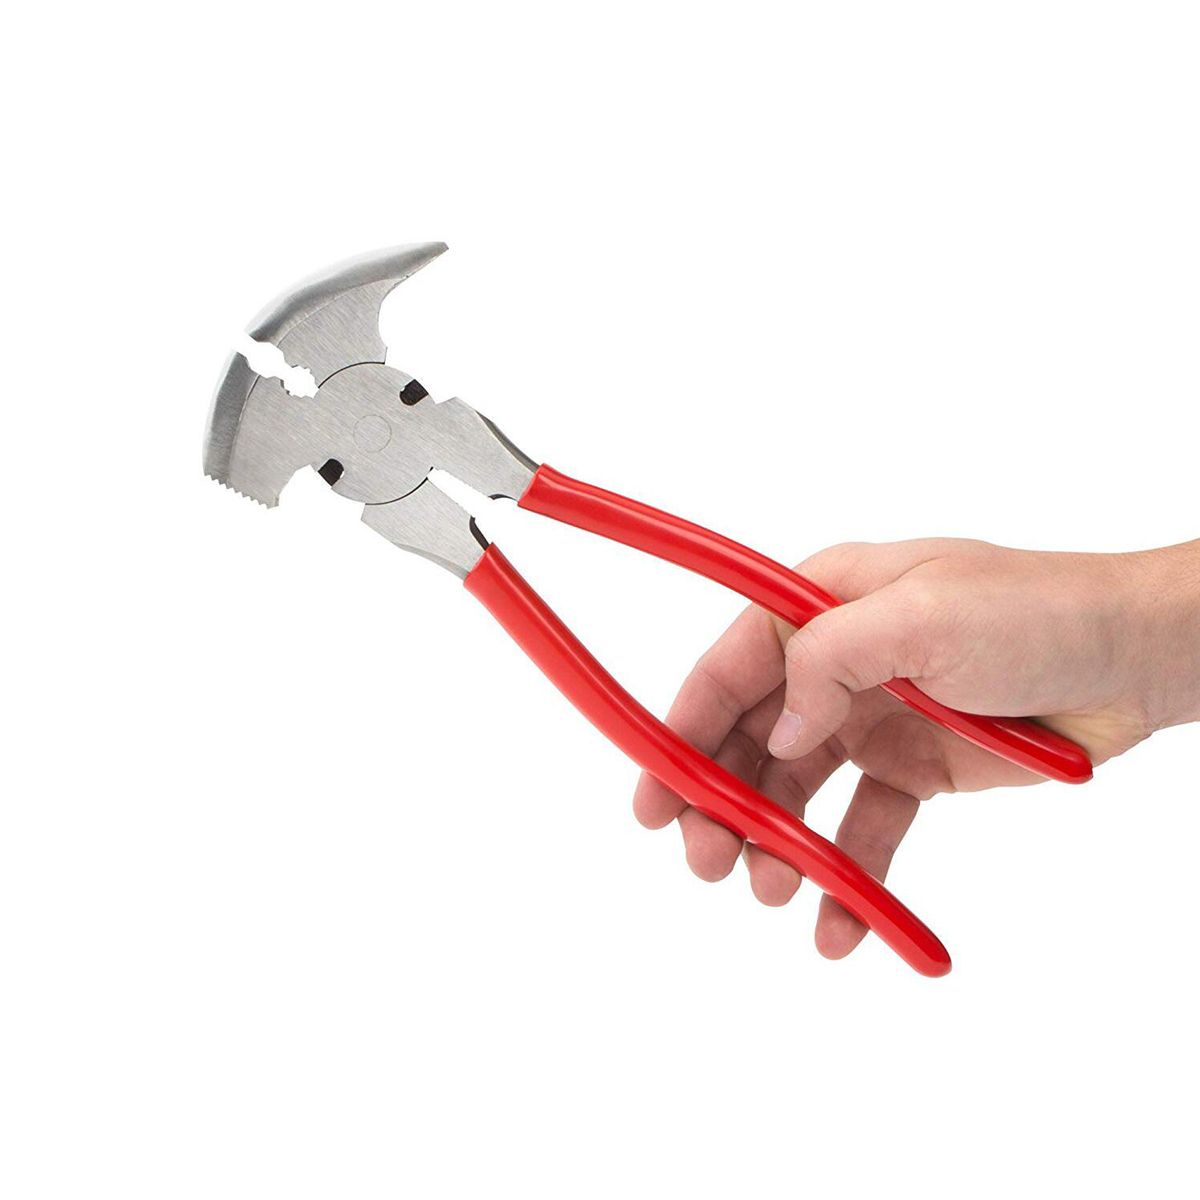 10inch-Fence-Pliers-Parallel-Jaws-Soft-Grip-Wire-Cutter-Fencing-Hammer-Tool-1575366